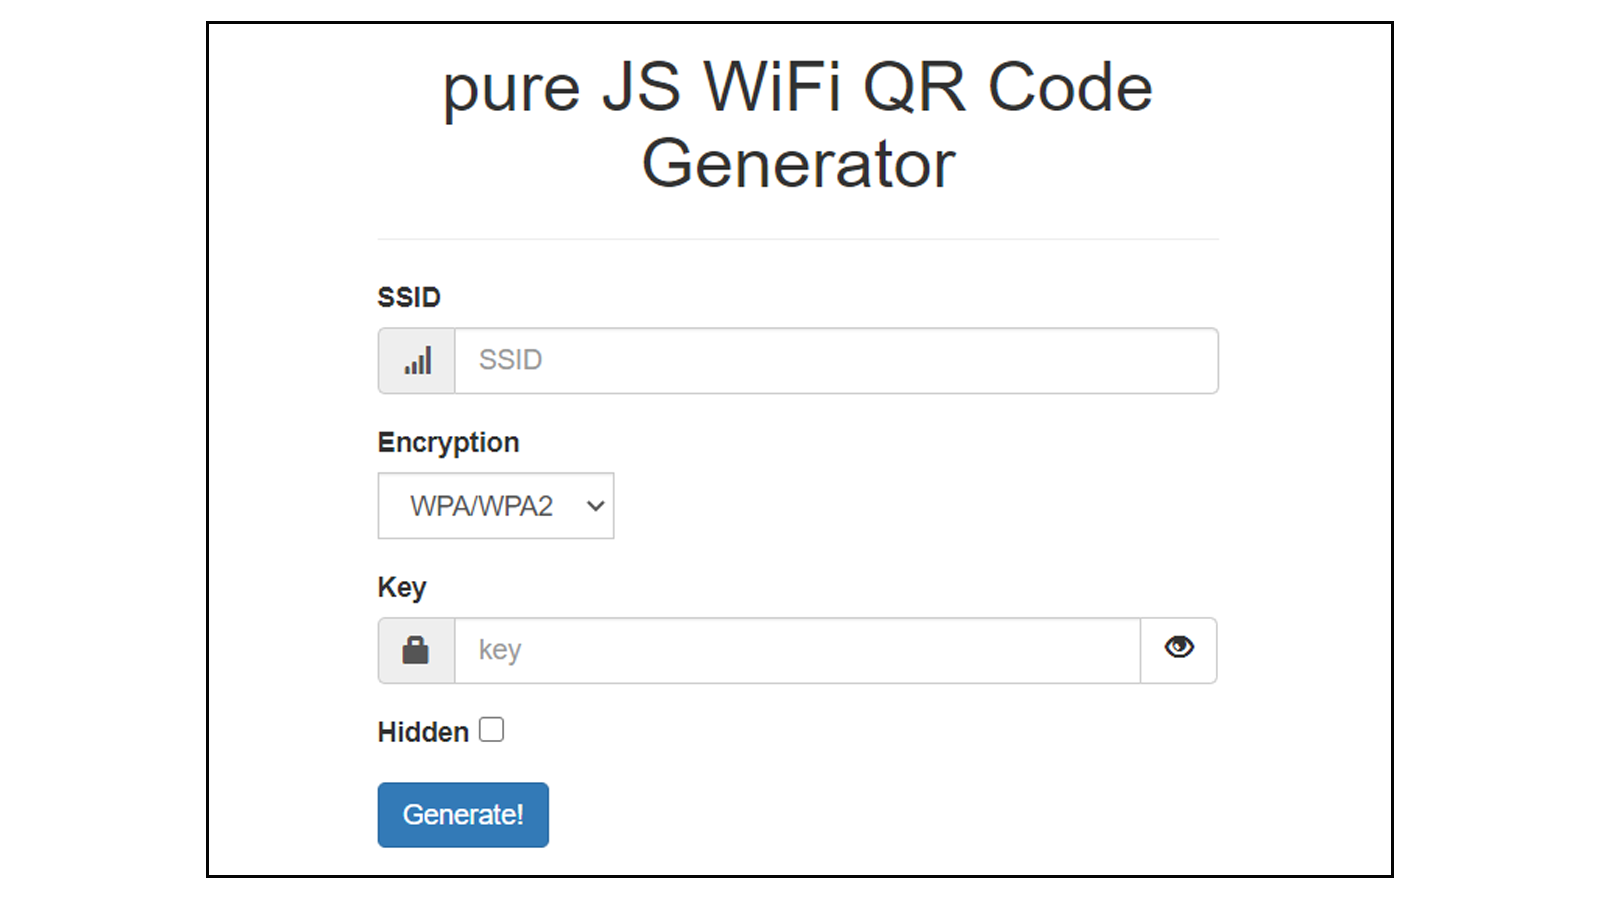 Qifi.org JavaScript QR Code generator page for your Wi-Fi password